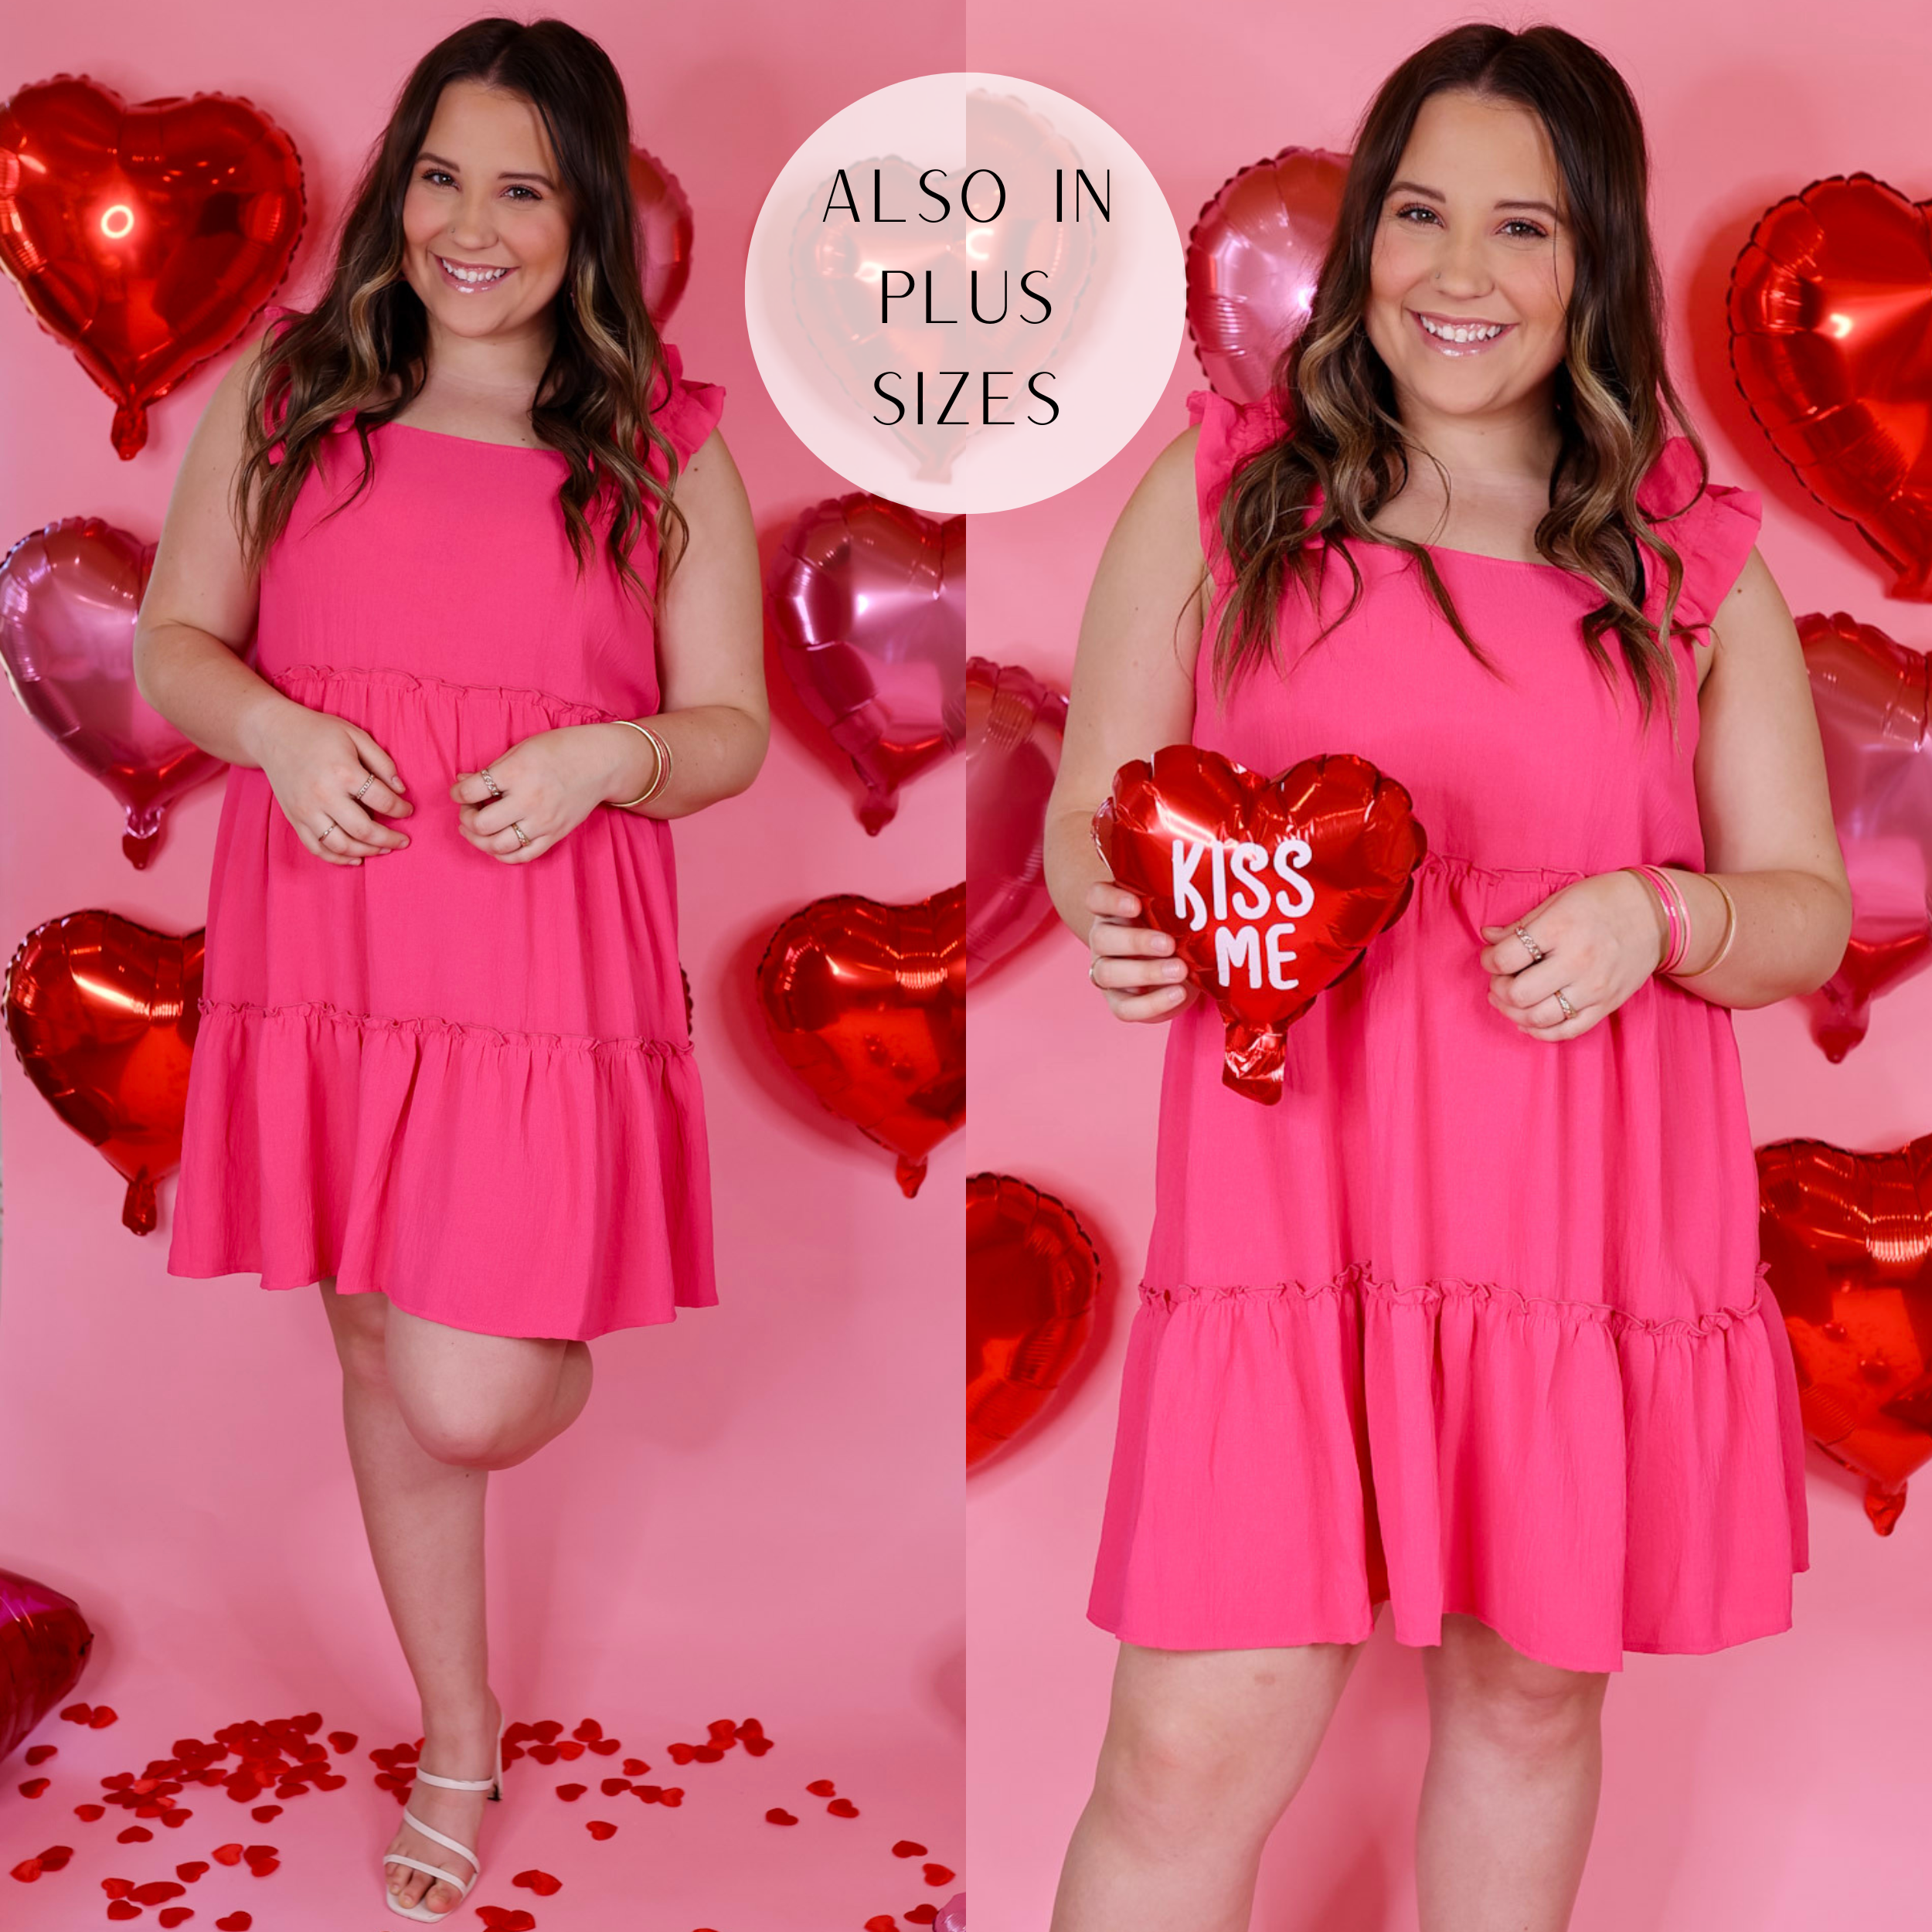 Model is wearing a tiered tank dress with ruffle sleeves in hot pink. Model has this dress paired with white heels, and silver jewelry. Background is light pink with red heart balloons.  